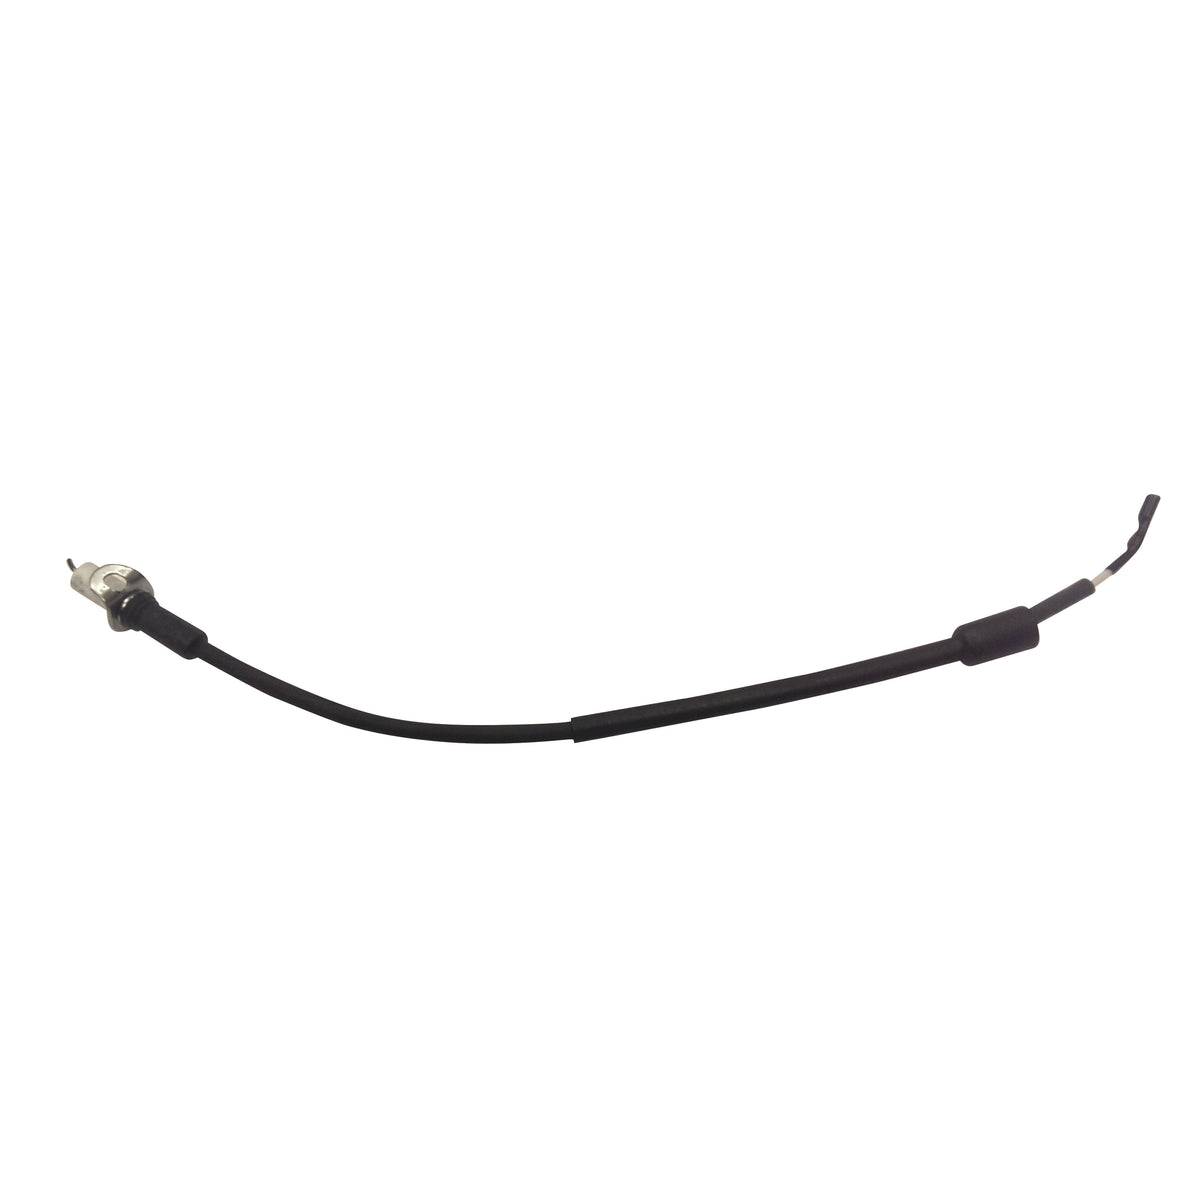 Ripack RIP 236035 Heat Gun Replacement Parts - 2000 Ignition Wire